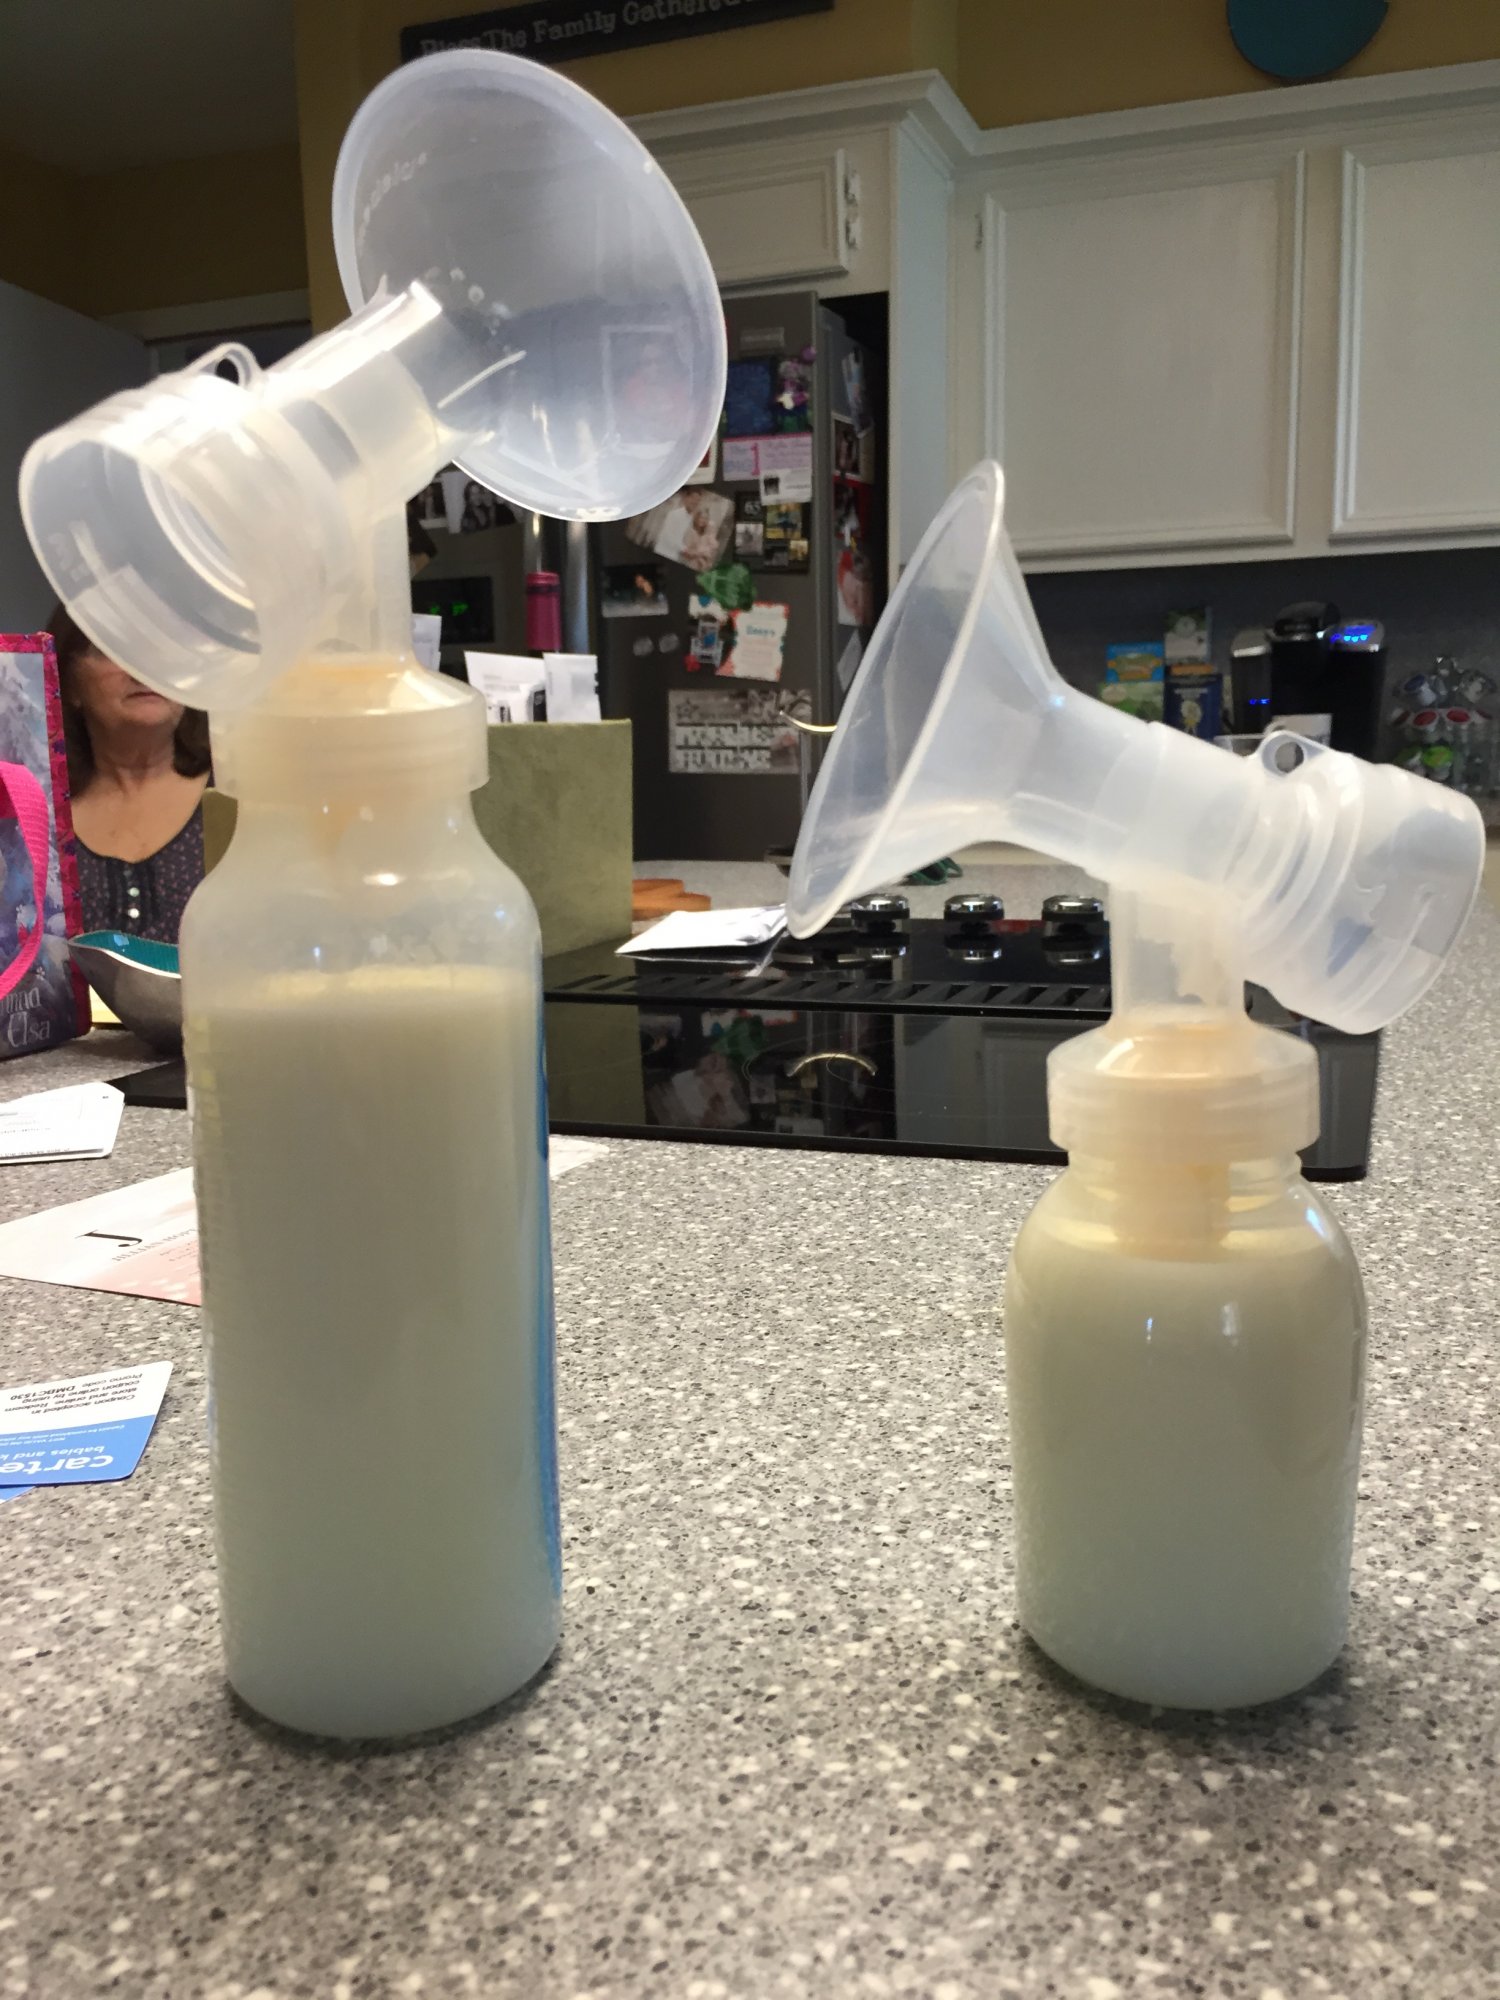 Two full bottles of recently pumped breastmilk